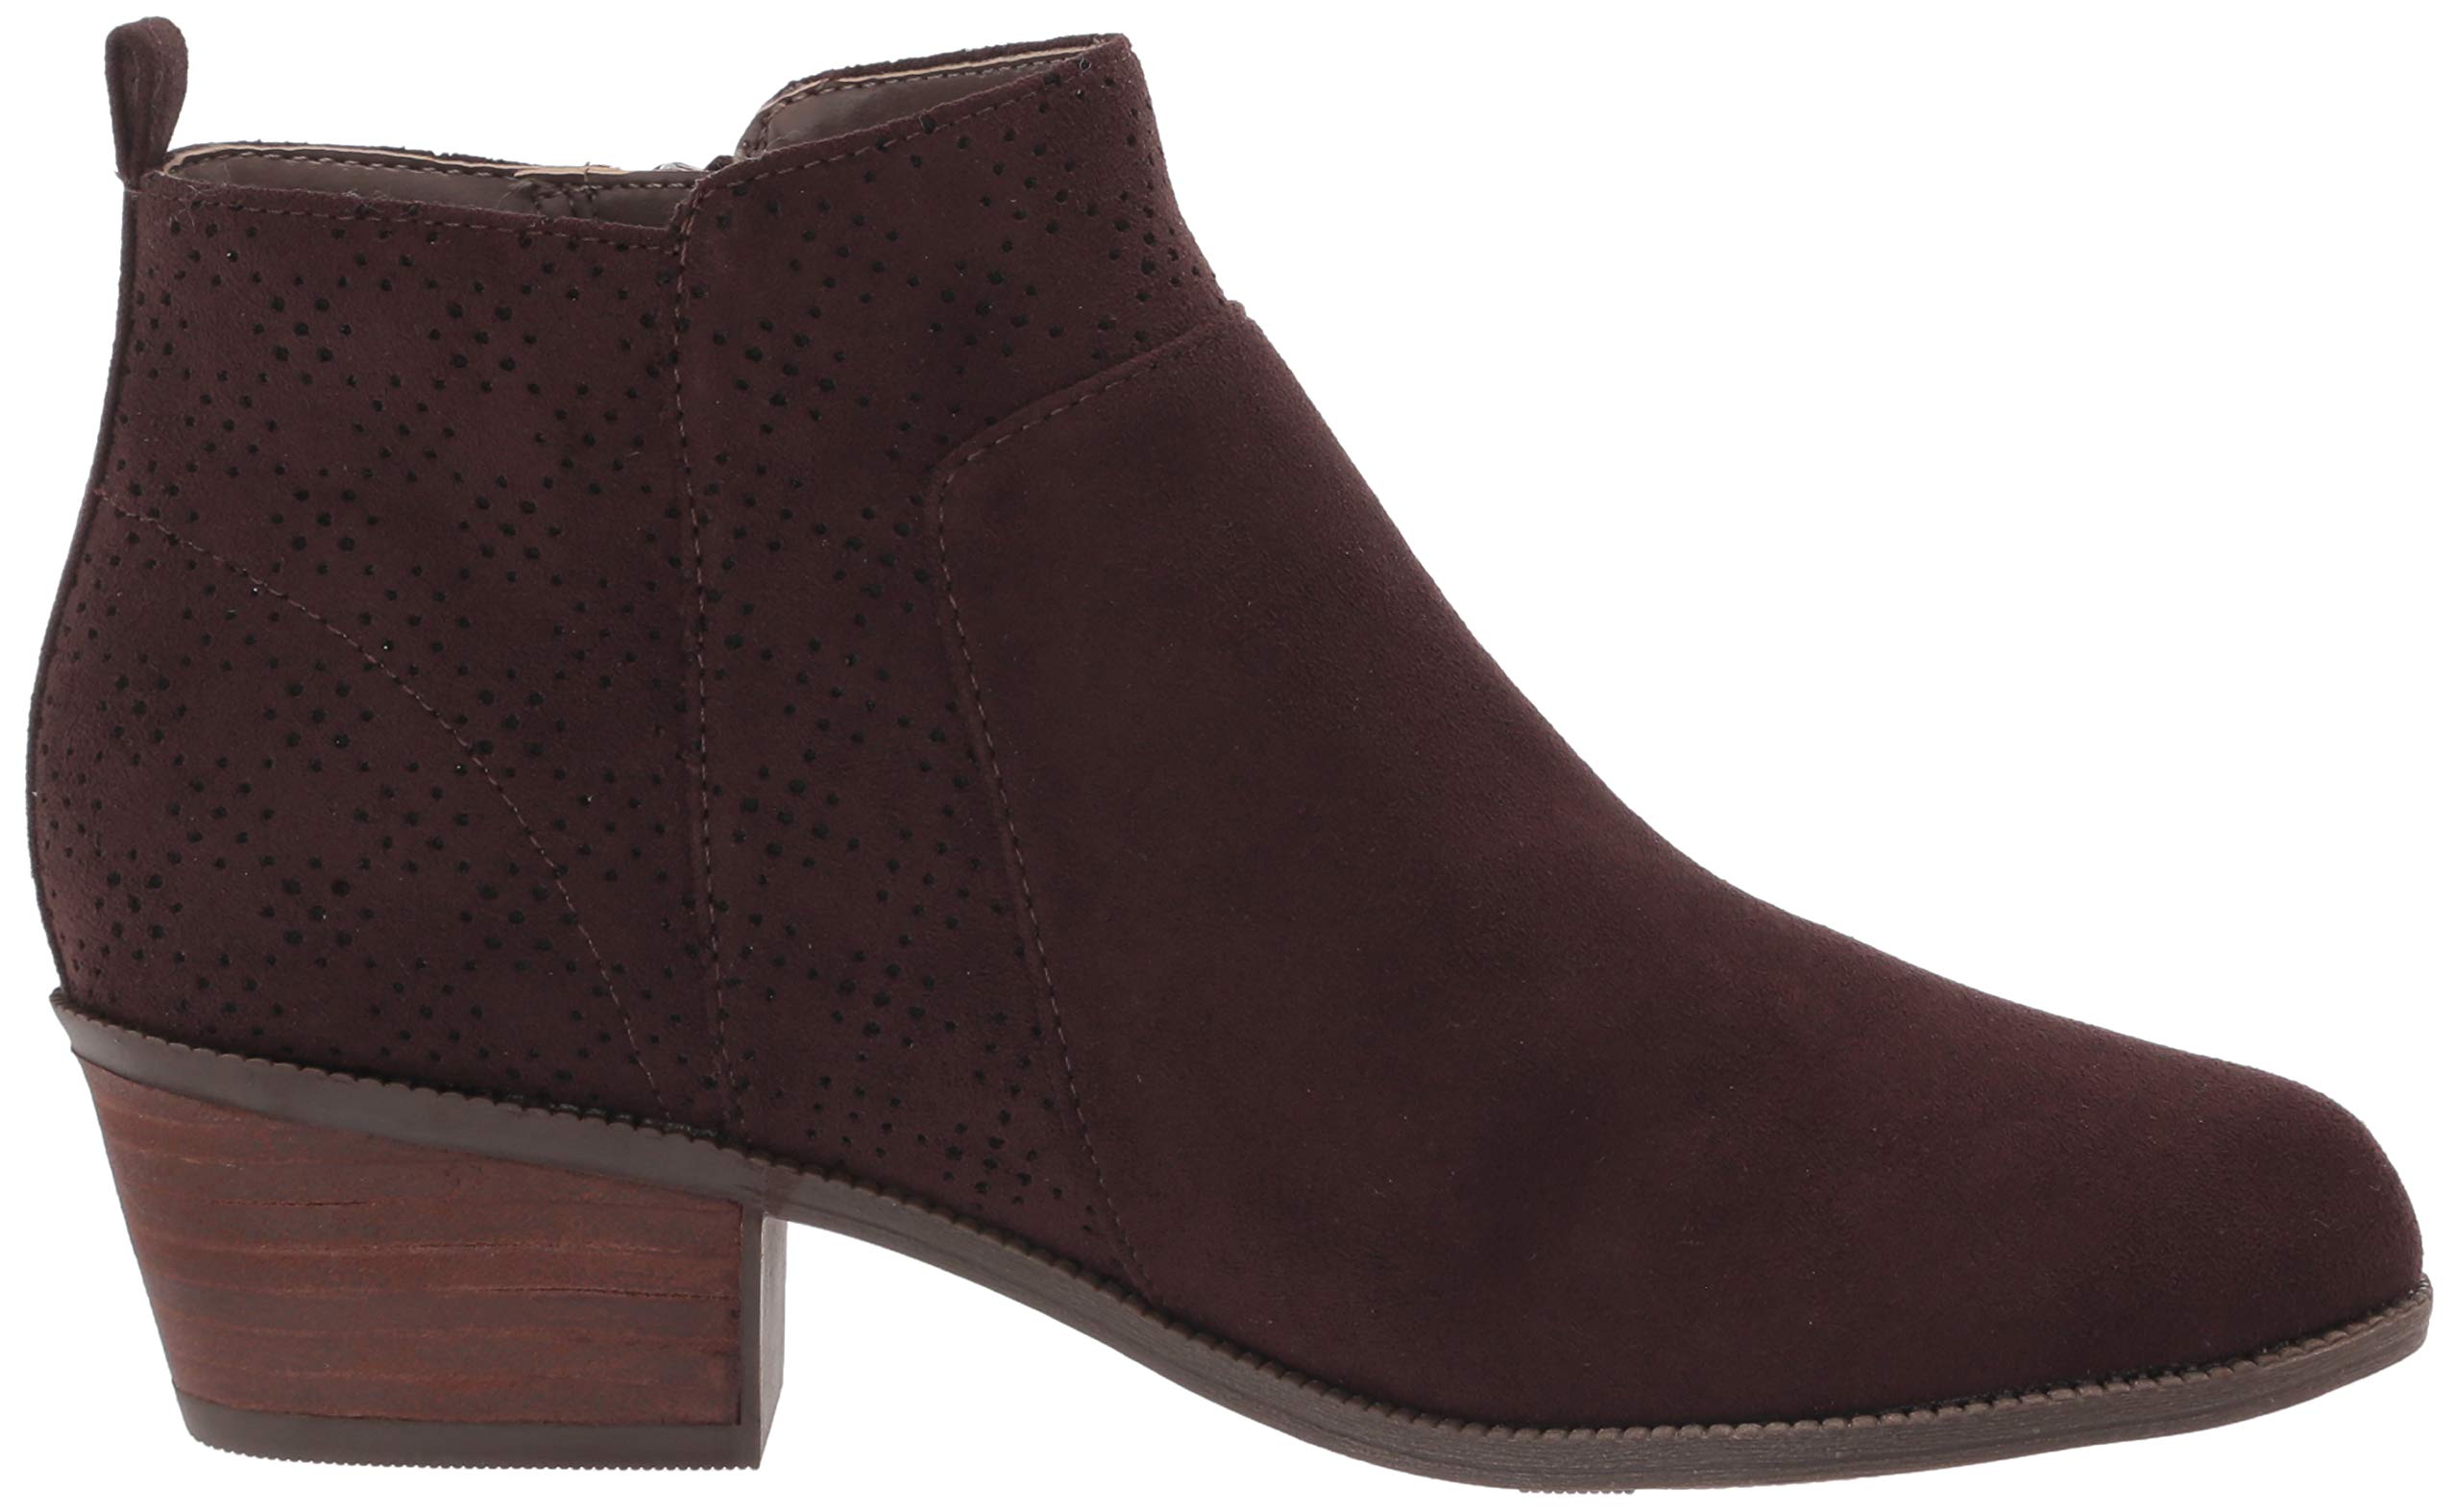 Dr. Scholl's Shoes womens Brianna Ankle Boot